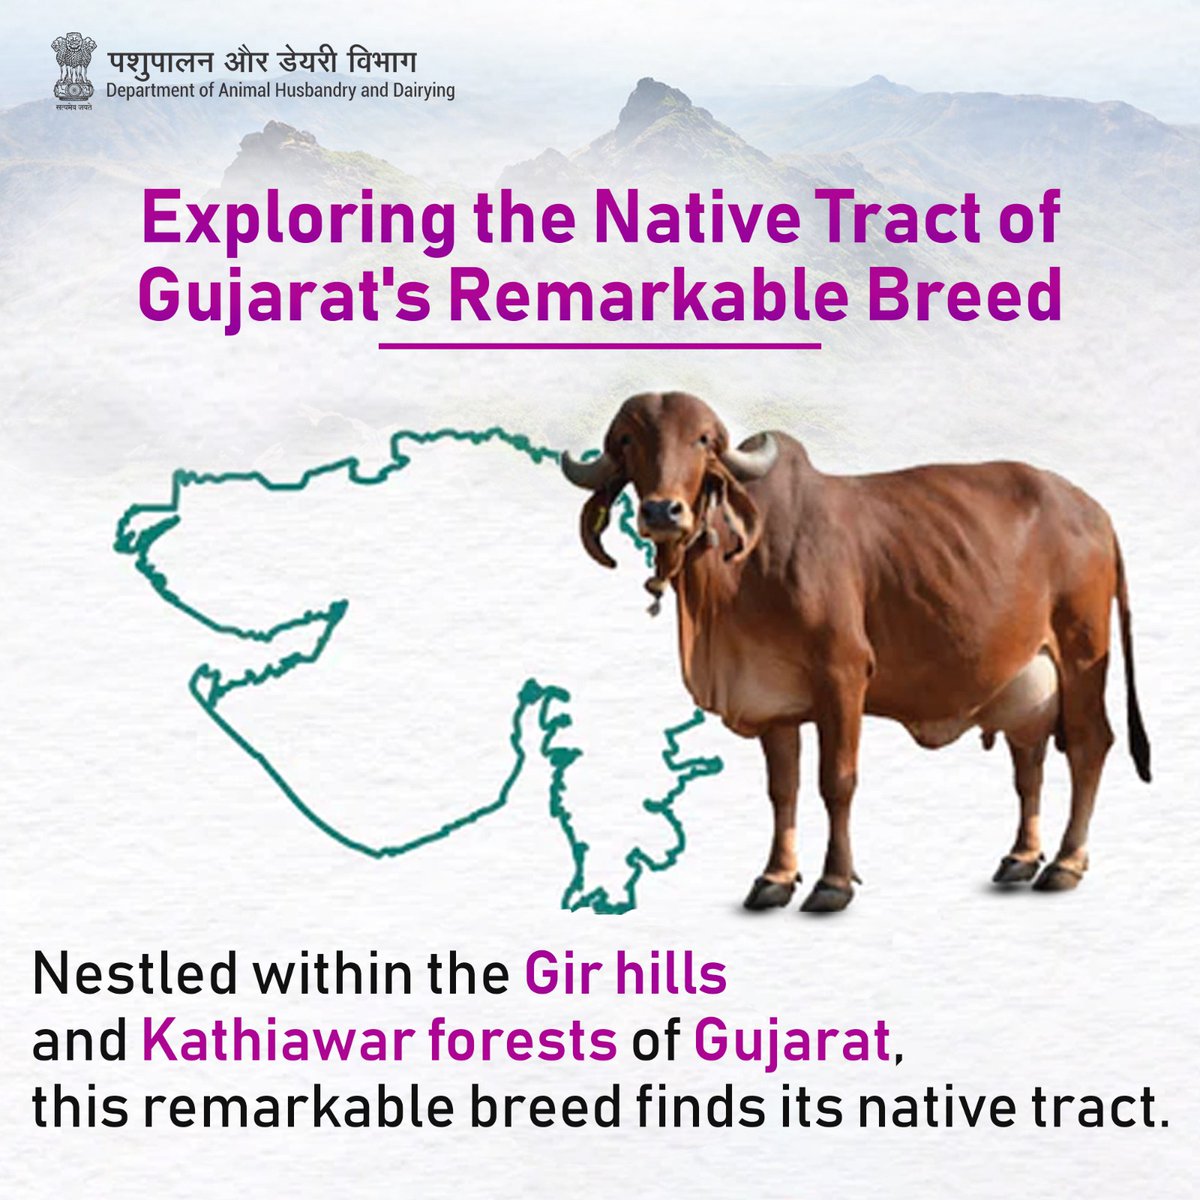 Discover Gujarat's remarkable Gir Cow breed in its native tract, nestled amid the #Girhills and #Kathiawar forests. #GirCowOrigins